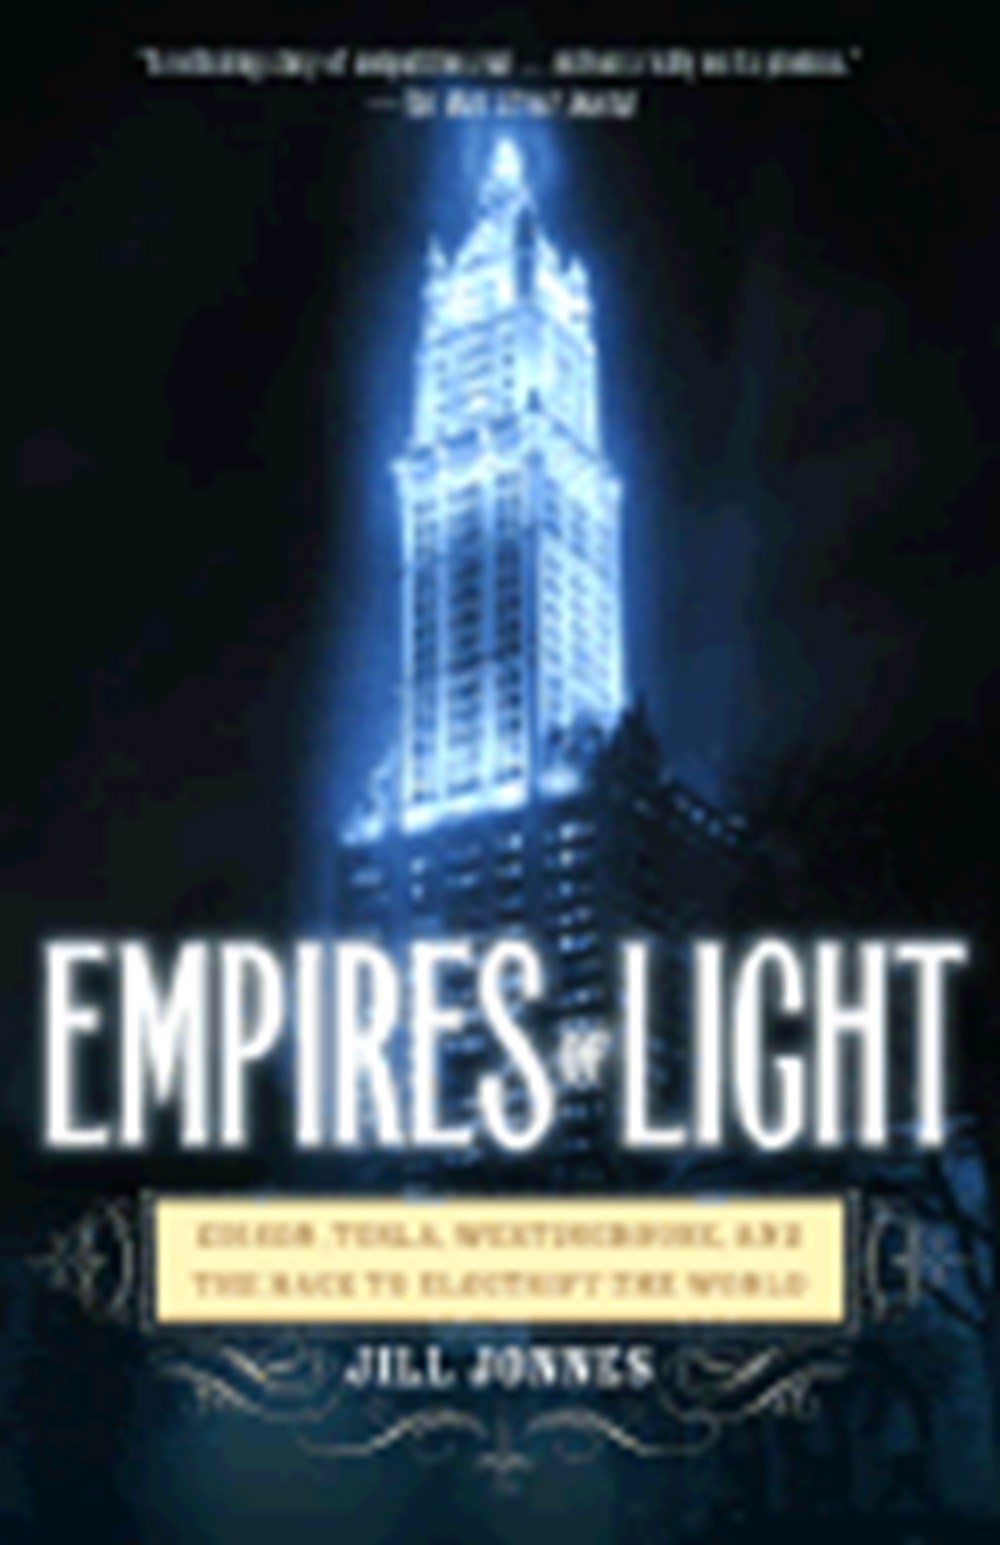 Empires of Light Edison, Tesla, Westinghouse, and the Race to Electrify the World (Rh Trade PB)